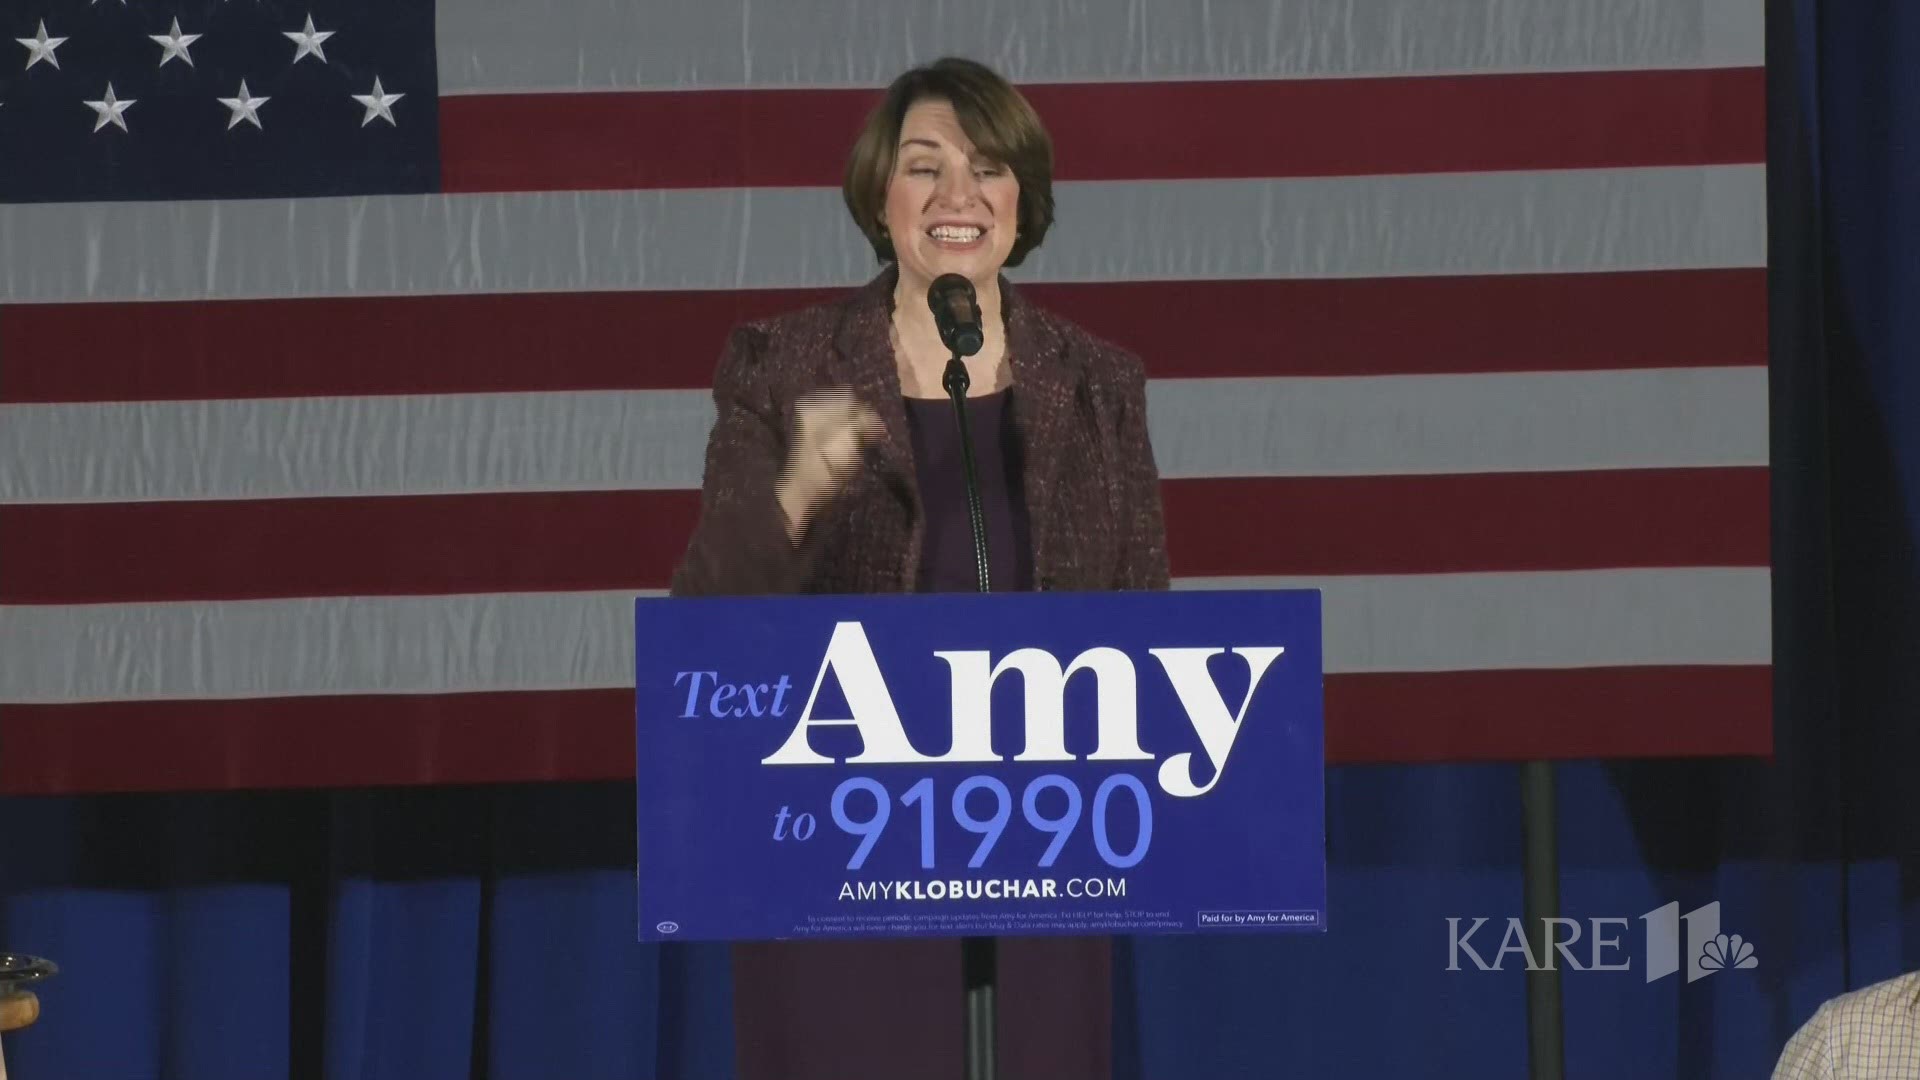 Sen. Amy Klobuchar (D-MN) speaks to supporters in Des Moines, Iowa on Dec. 27, 2019, after completing her tour of all 99 Iowa counties.